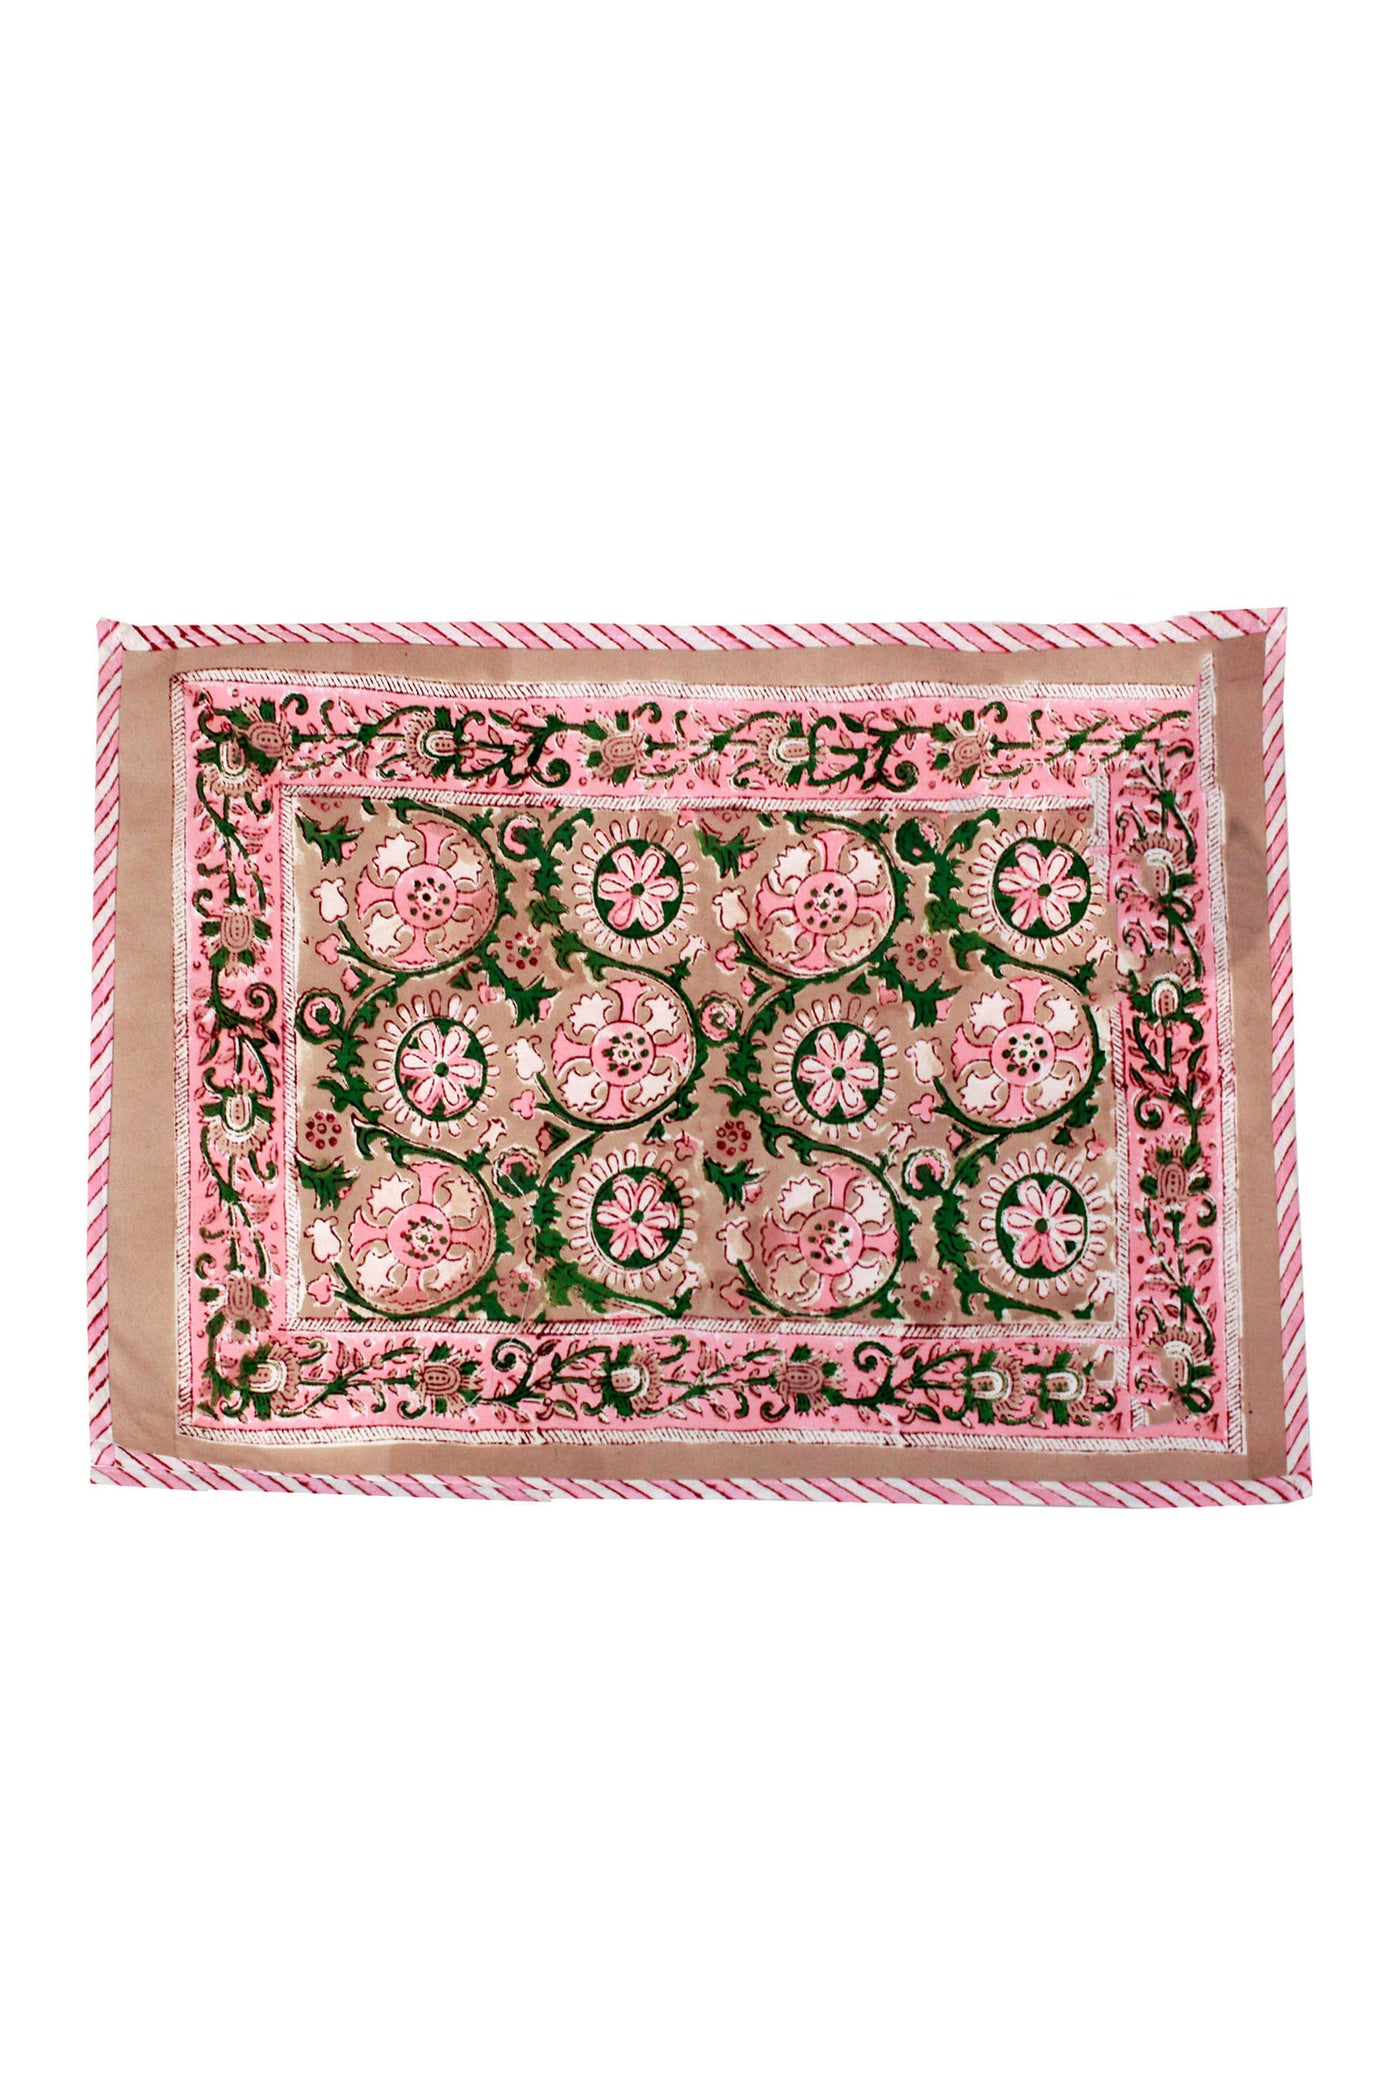 Gud Jaal Hand Block Print Placemats in Cameo Rose